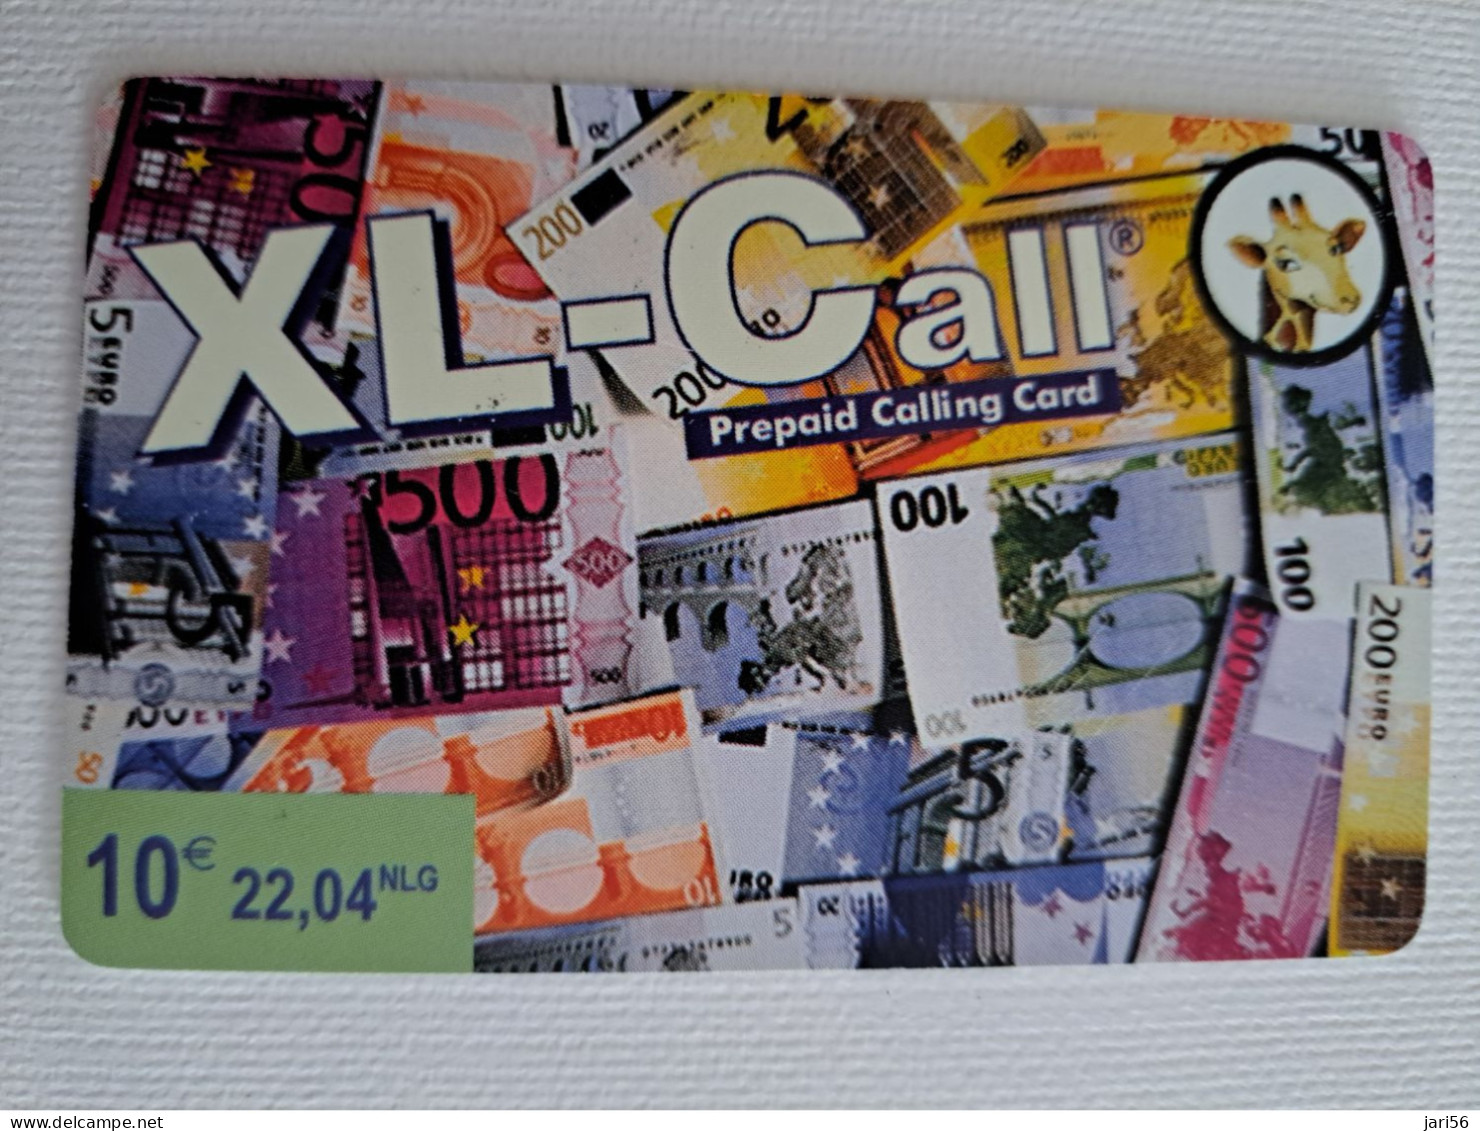 NETHERLANDS  HFL 10,-  XL-CALL  /BANKNOTES     / OLDER CARD    PREPAID  Nice Used  ** 15766** - Schede GSM, Prepagate E Ricariche